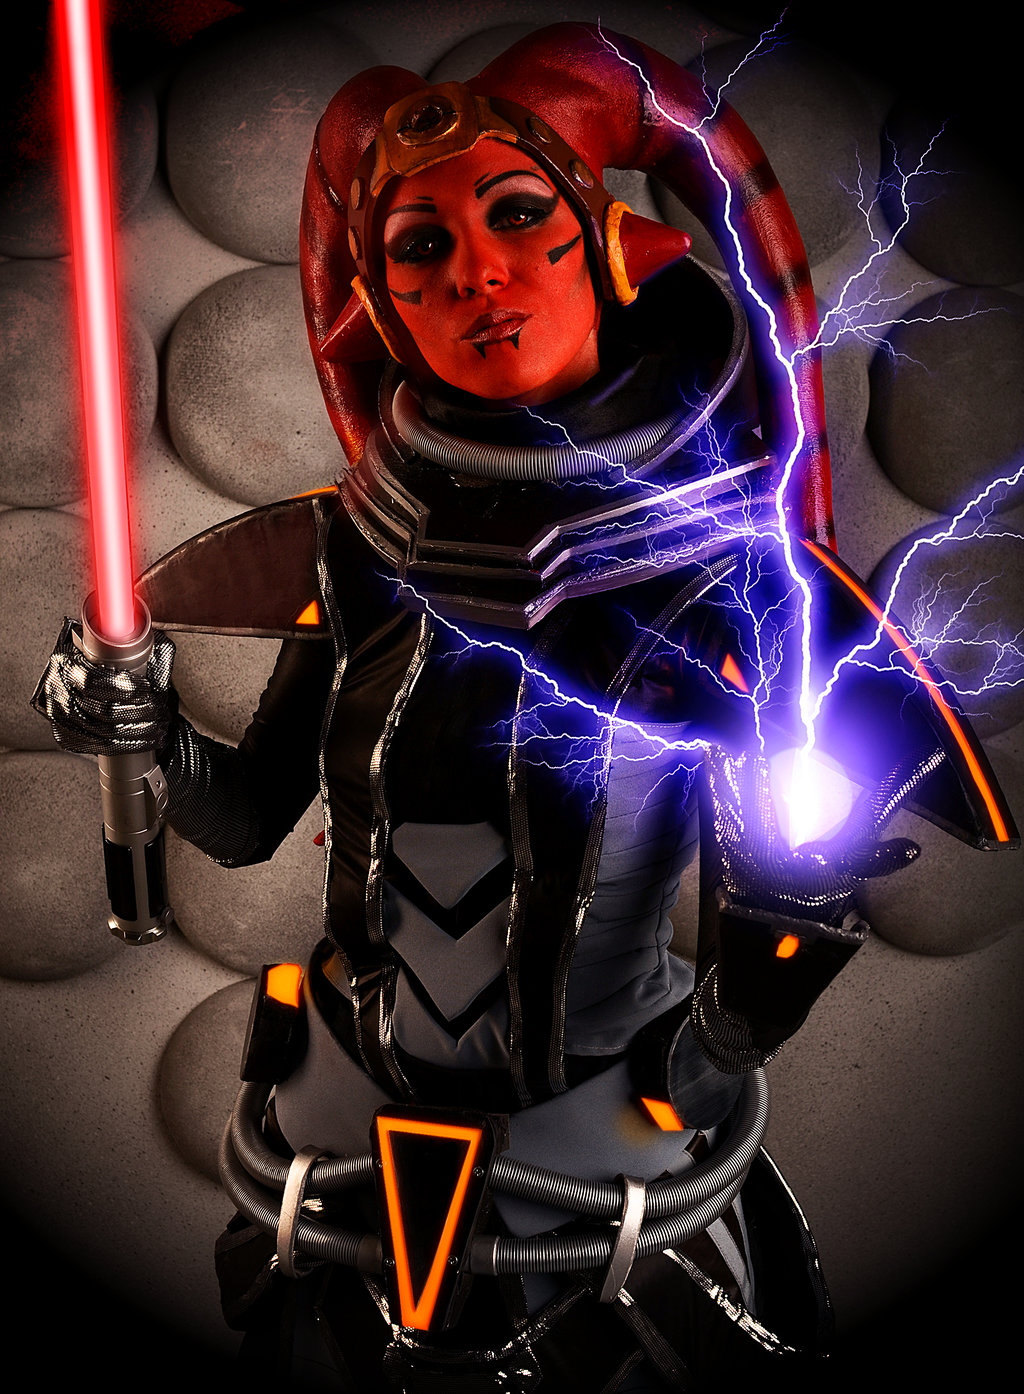  Wars The Old Republic   Sith Inquisitor 5 by Feyische on